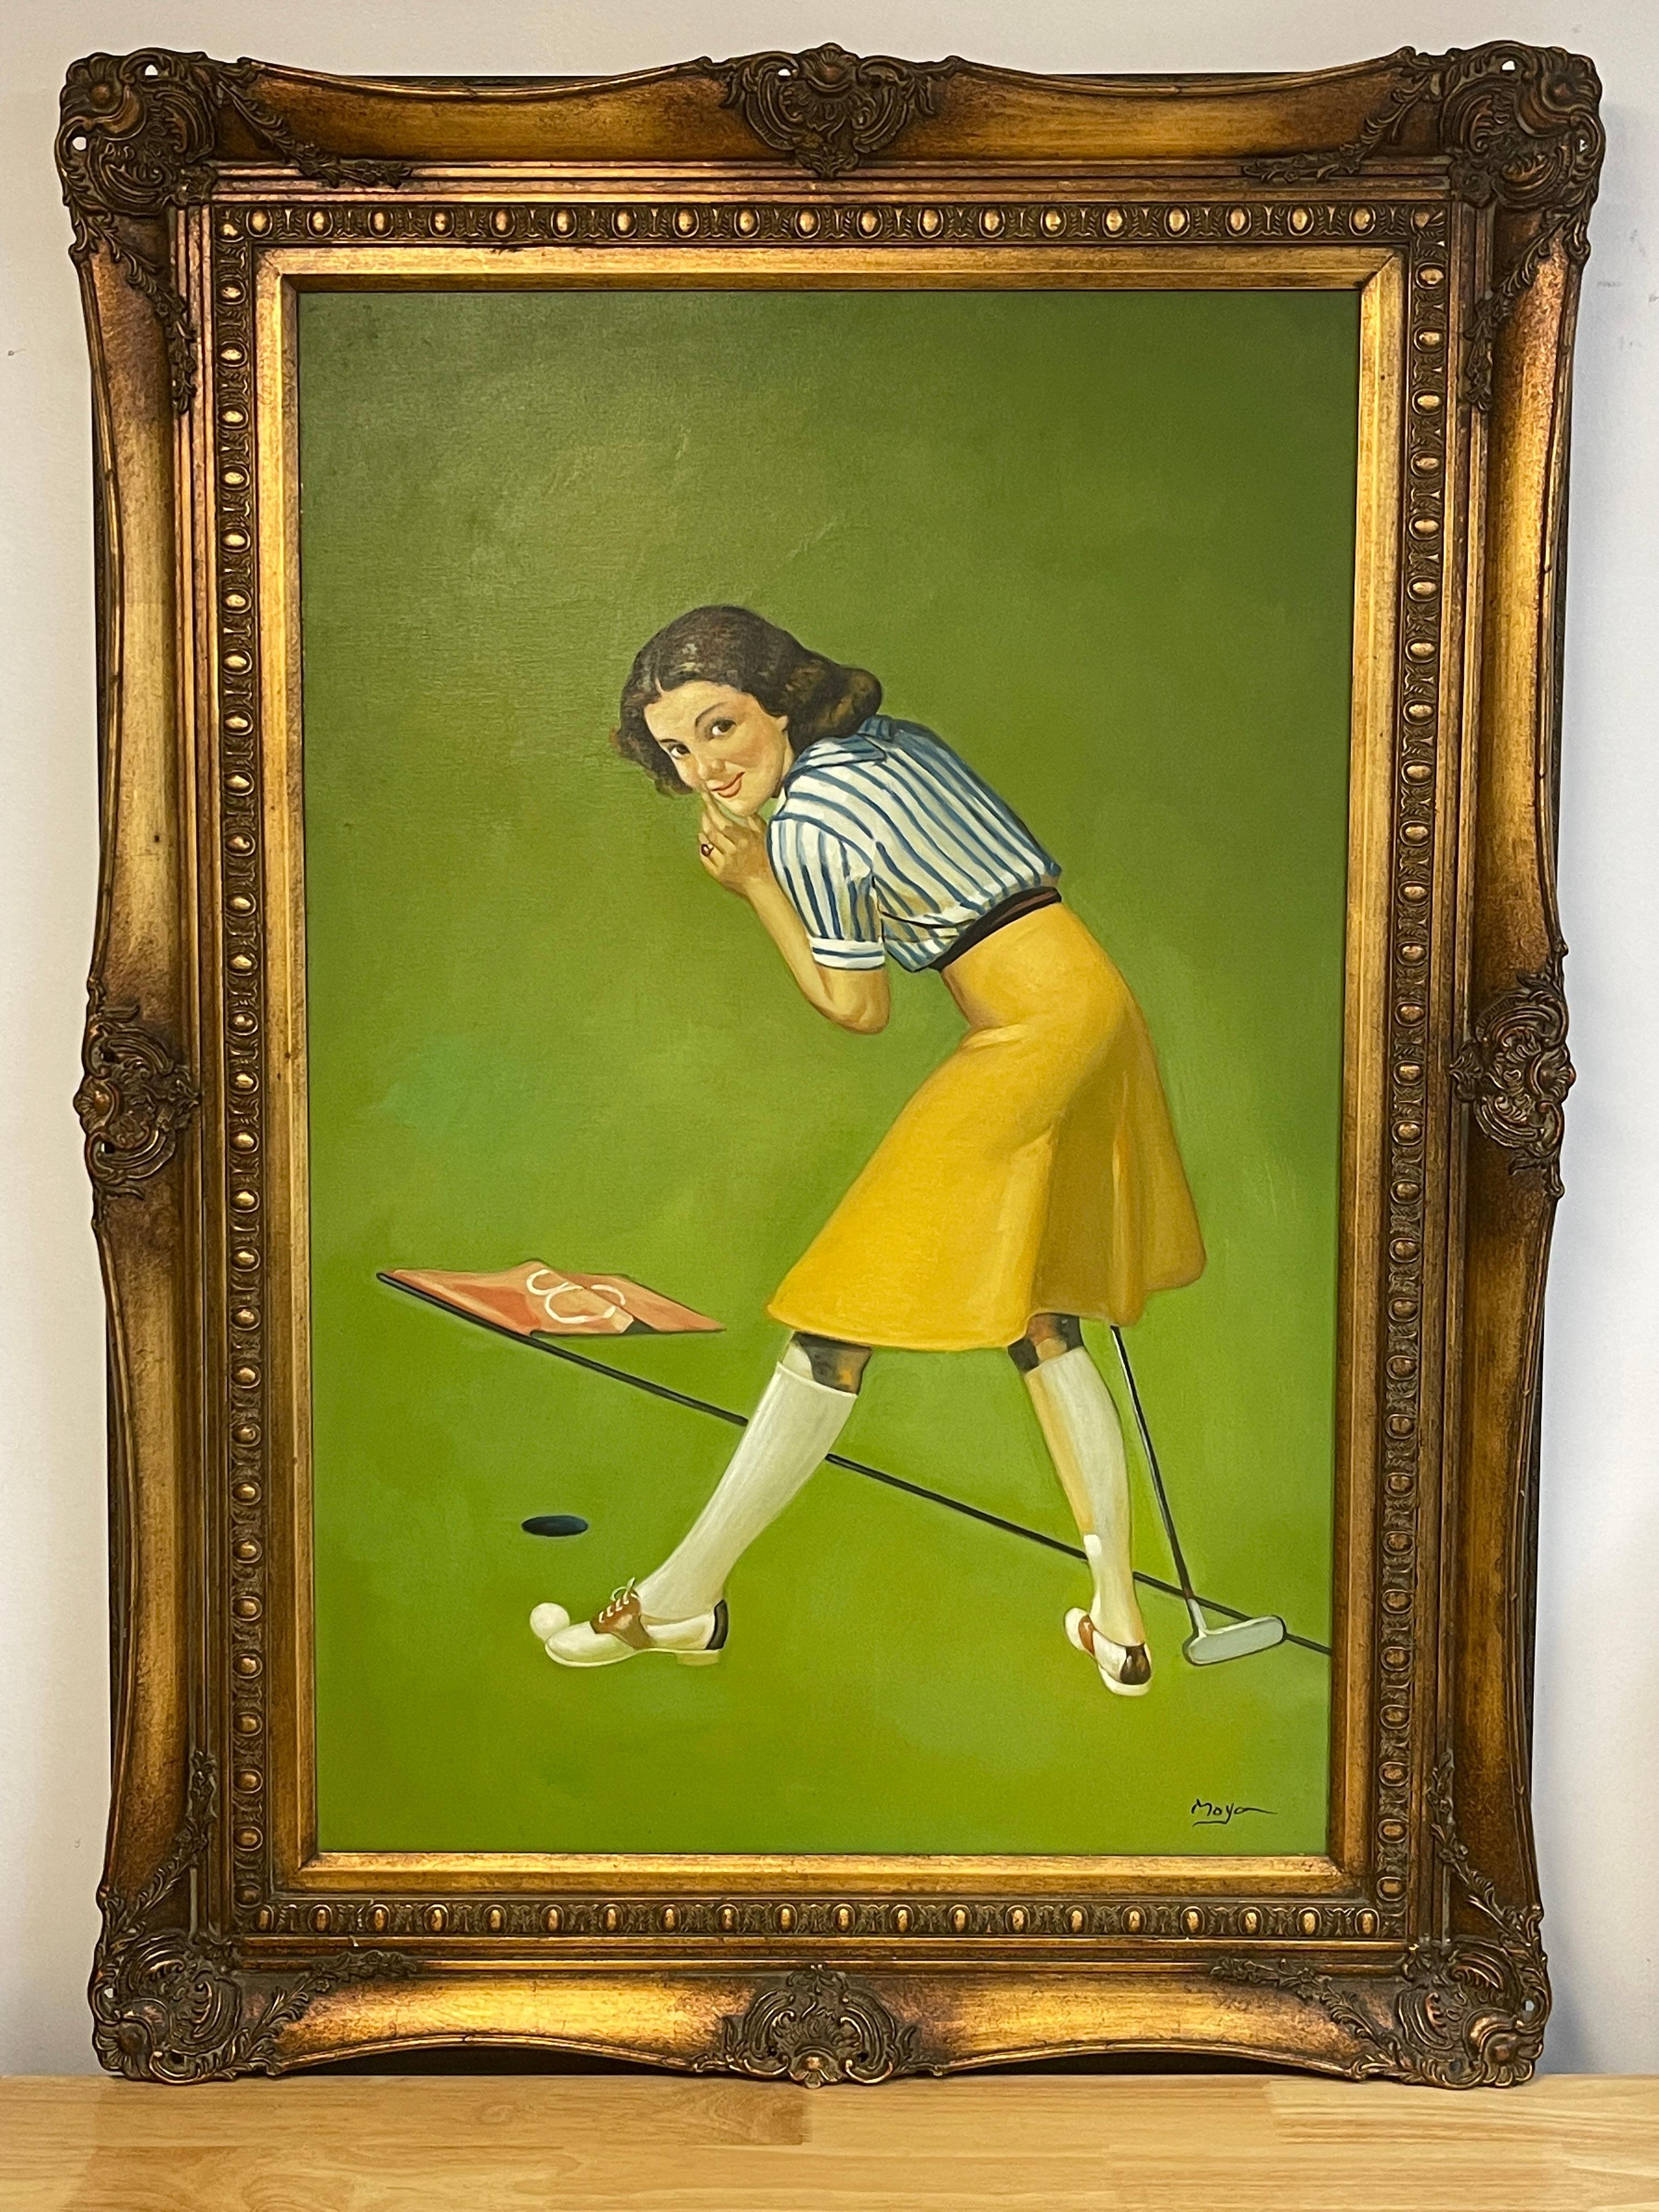 1960s Golf Pinup '8th Hole' by Roberto Moya, Whimsical oil on canvas, of a brunette golfer with an inclination of winning the 8th hole. signed lower right 'Moya' , within a carved giltwood frame
Oil on canvas 24